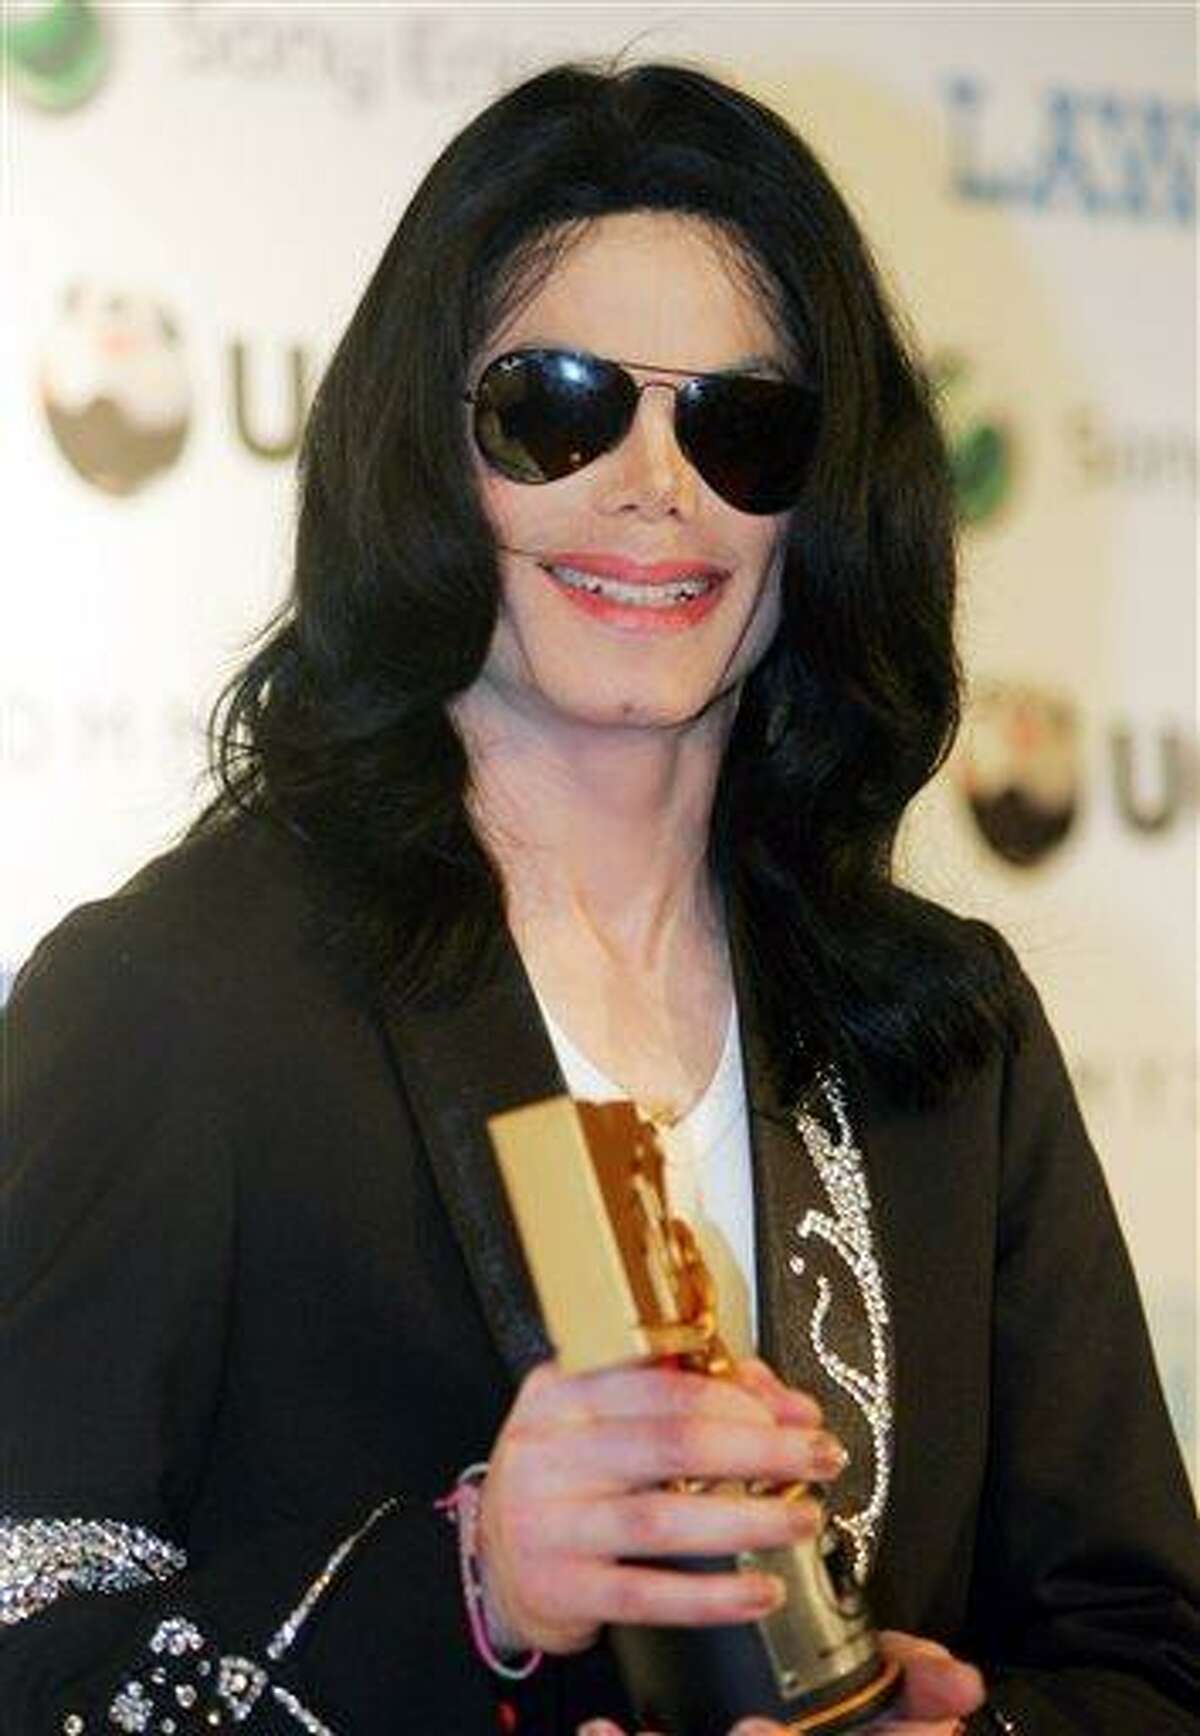 FILE - In this May 27, 2006 file photo, Michael Jackson smiles during a press conference of the MTV Video Music Awards Japan 2006 in Tokyo. The U.S. entertainer was awarded a Legend Award at the ceremony. Jurors hearing a civil case in Los Angeles filed by Jackson's mother, Katherine Jackson, have heard numerous stories about the entertainer's devotion to his children as expressed through extravagant birthday parties and secret family outings. The tender moments have been described throughout the trial, which concluded its eighth week on Friday, June 21, 2013. (AP Photo/Koji Sasahara, File)